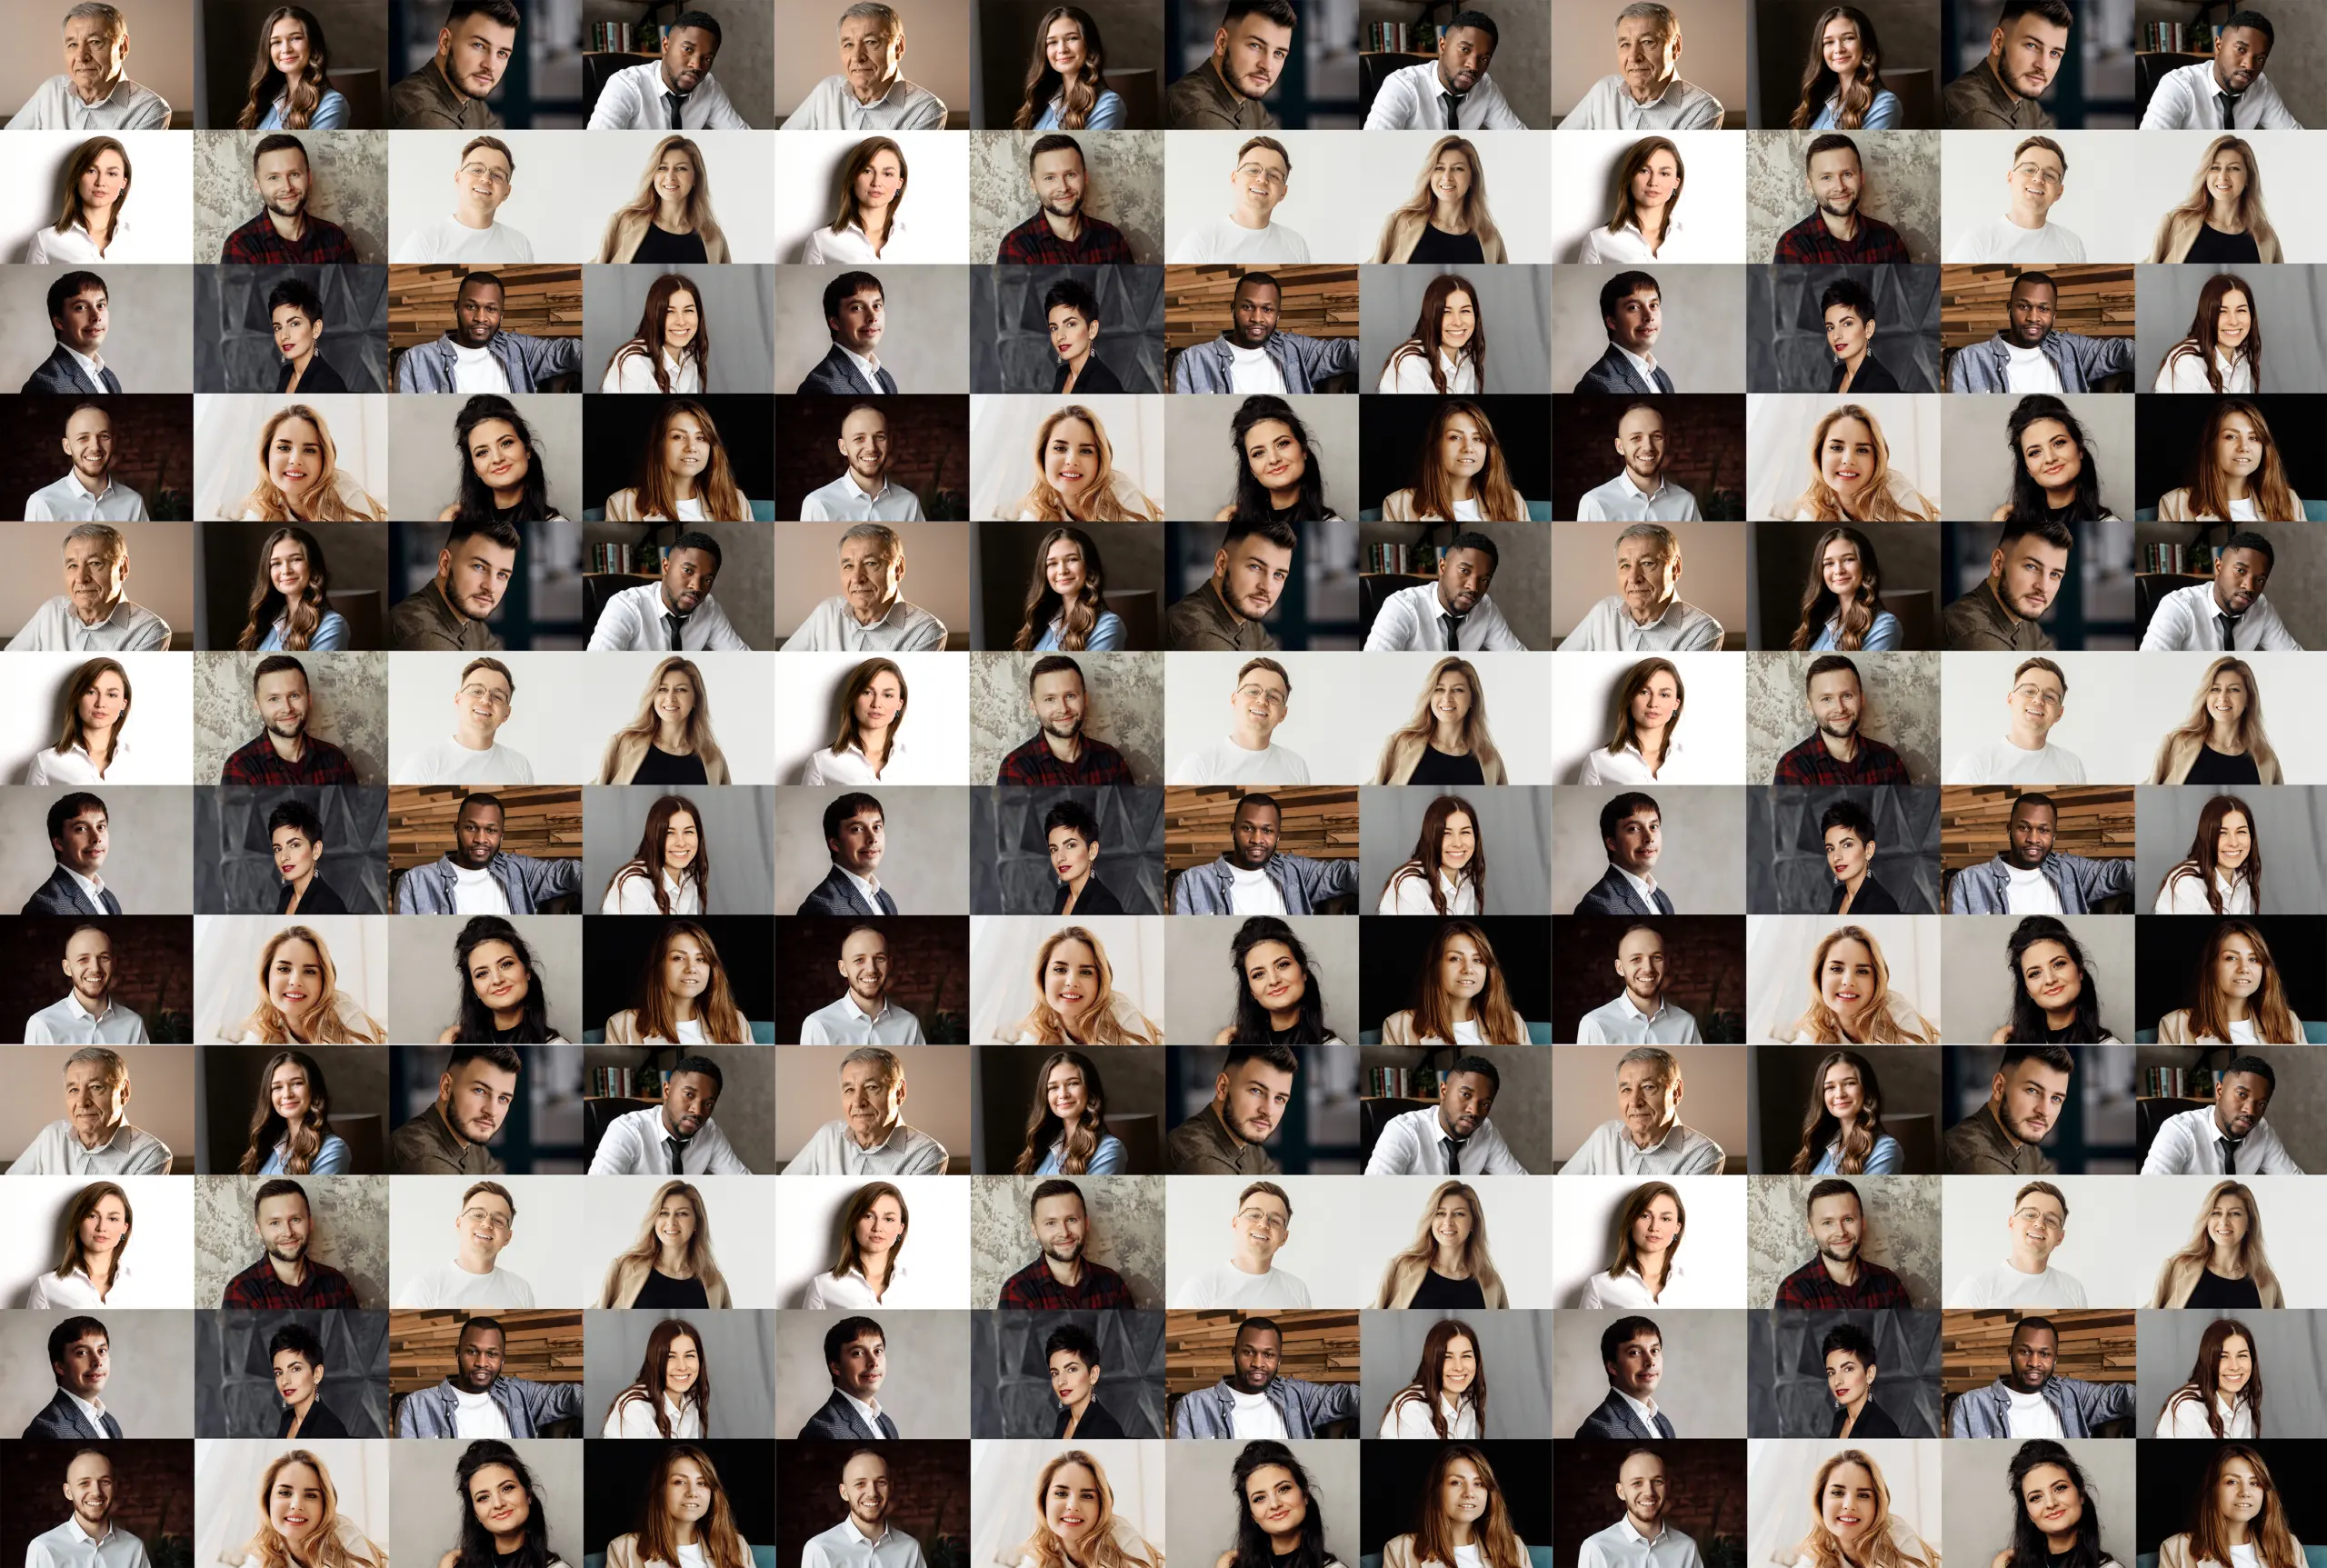 Collage of a lot of happy people. Headshots collection, collage mosaic. Many lot of multicultural different male and female smiling faces looking at camera. Many smiling faces. High quality photo